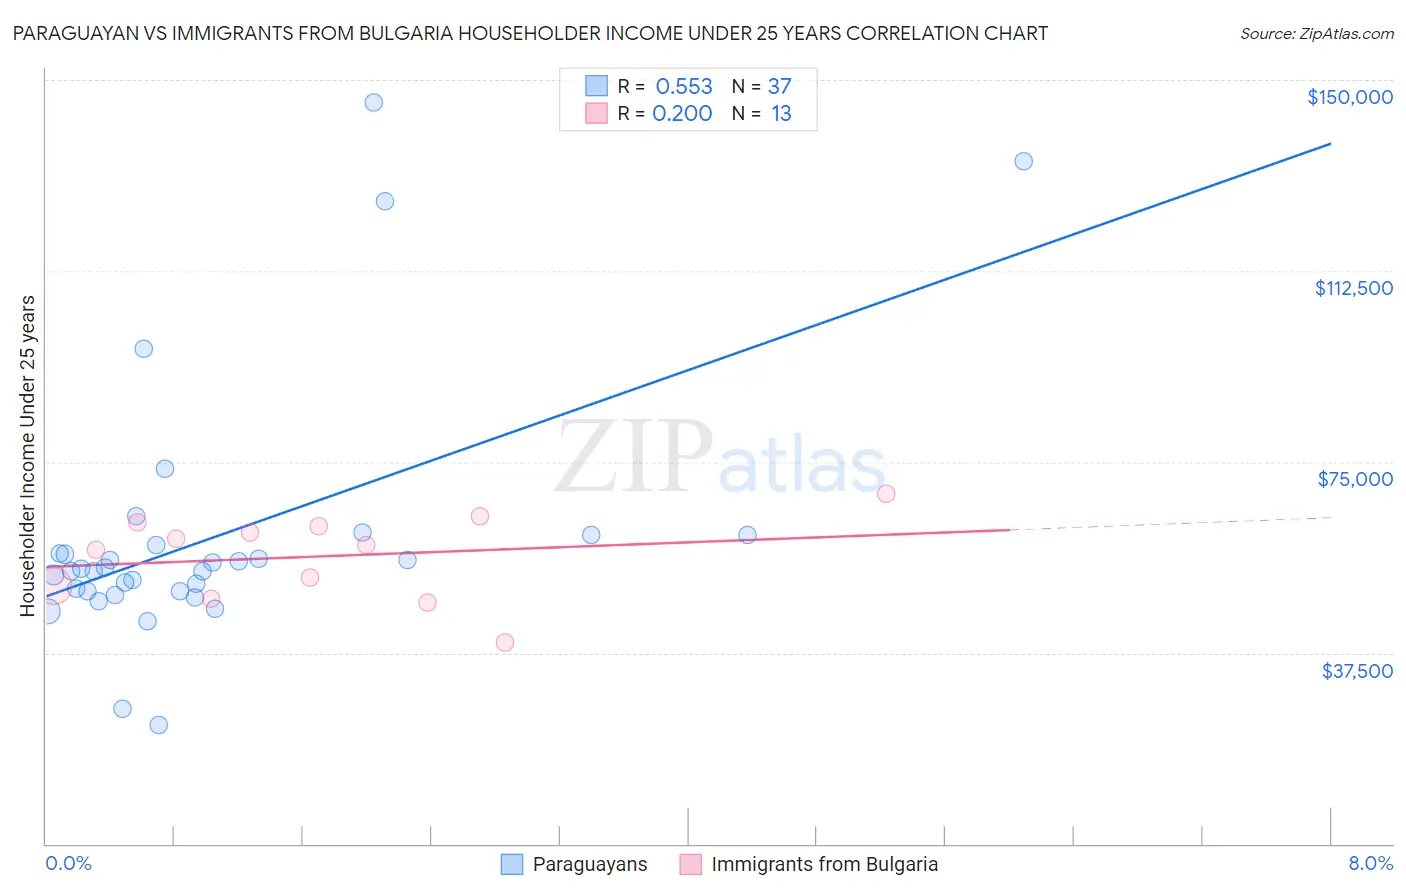 Paraguayan vs Immigrants from Bulgaria Householder Income Under 25 years